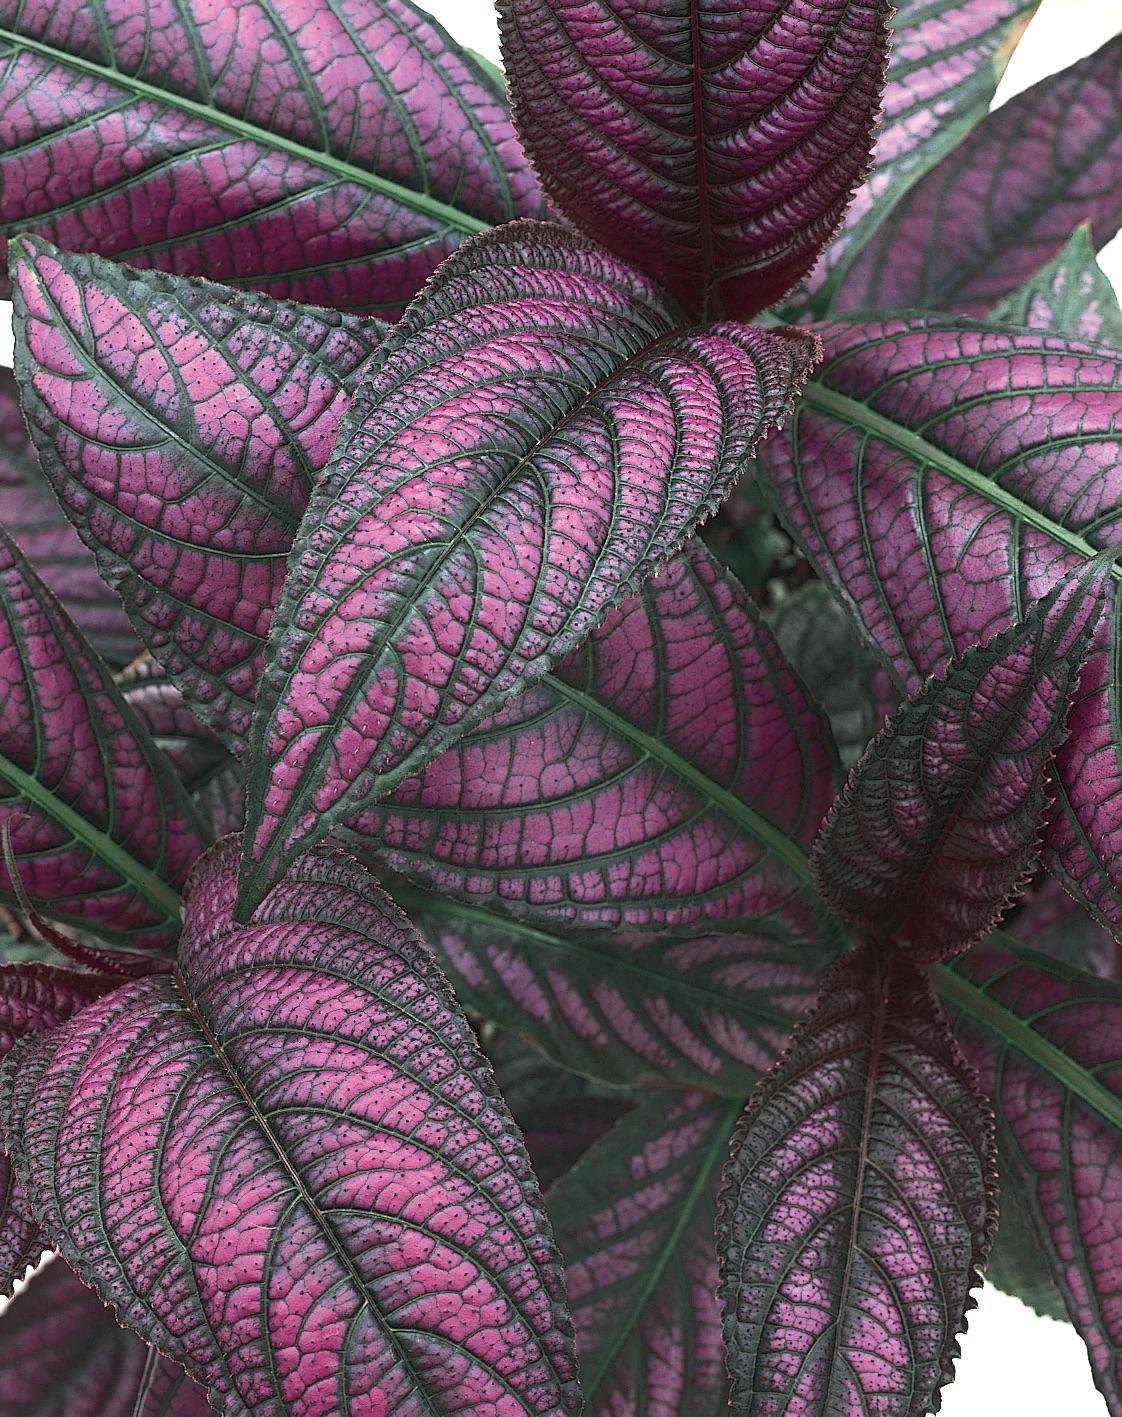 Persian Shield produces 8-inch-long leaves that are iridescent in shades of purple, lilac and pink with purple-maroon on the undersides. (Norman Winter/TNS)